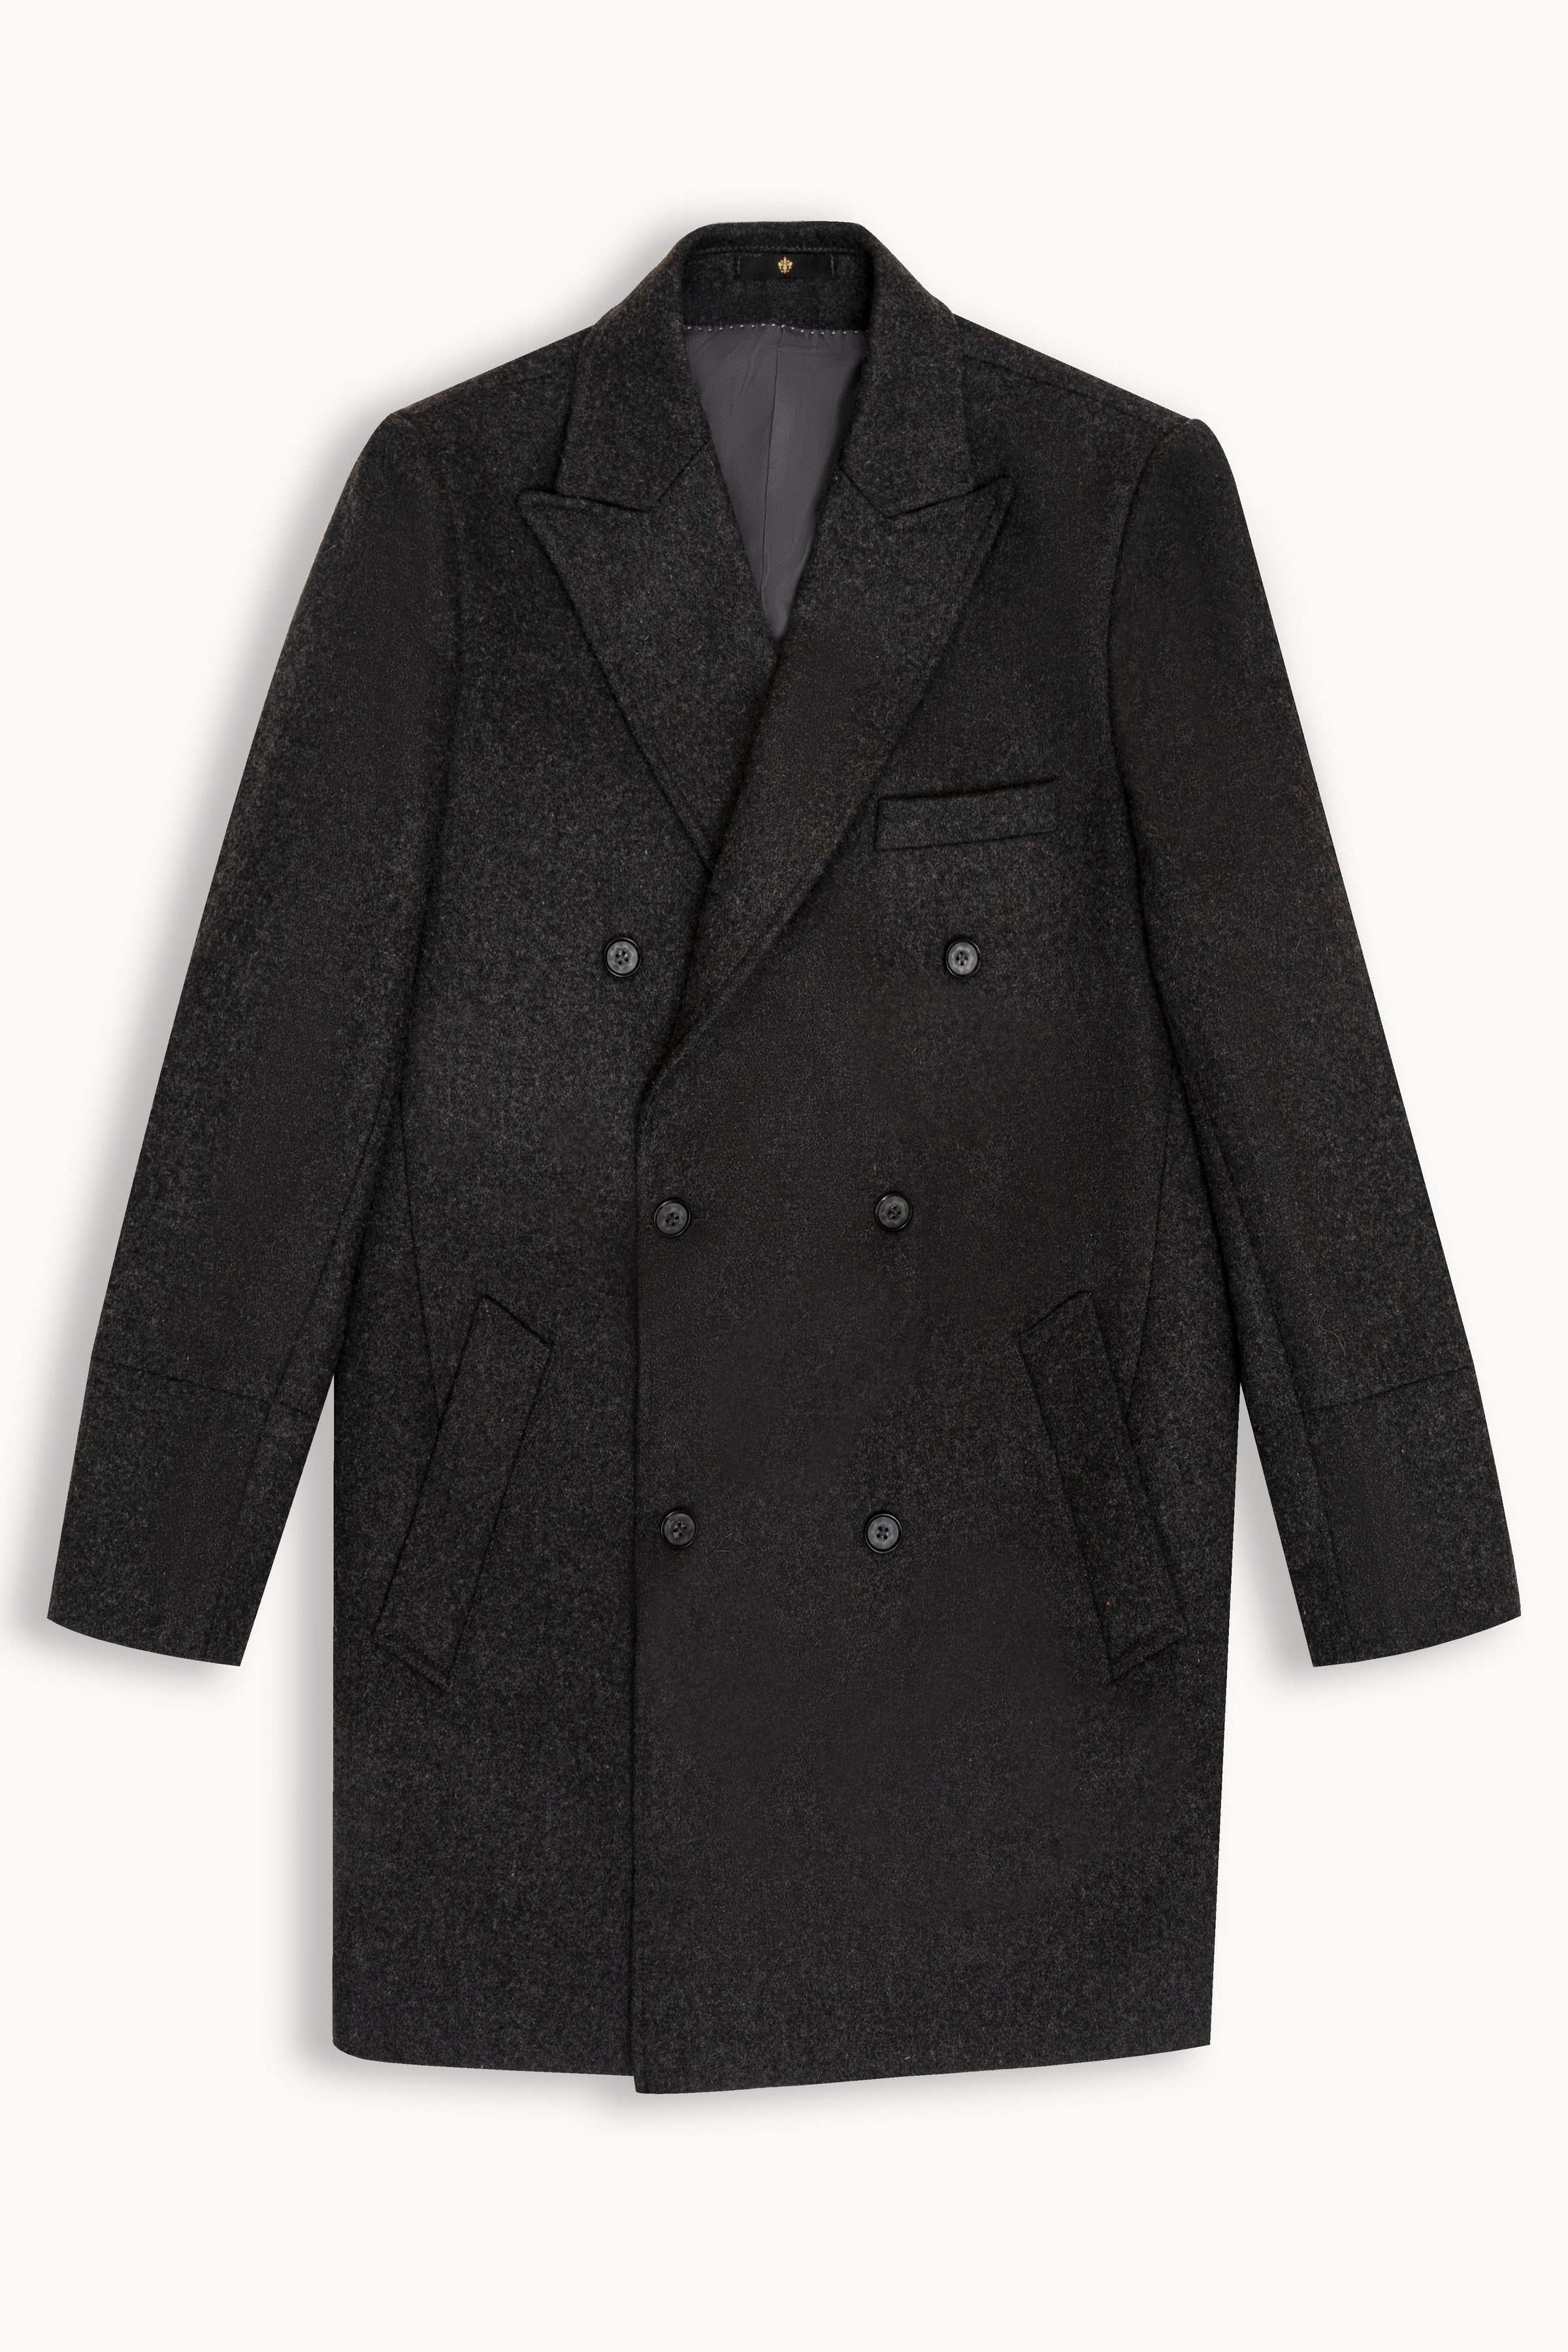 WOOLEN LONG COAT DOUBLE BREASTED CHARCOAL GREY at Charcoal Clothing